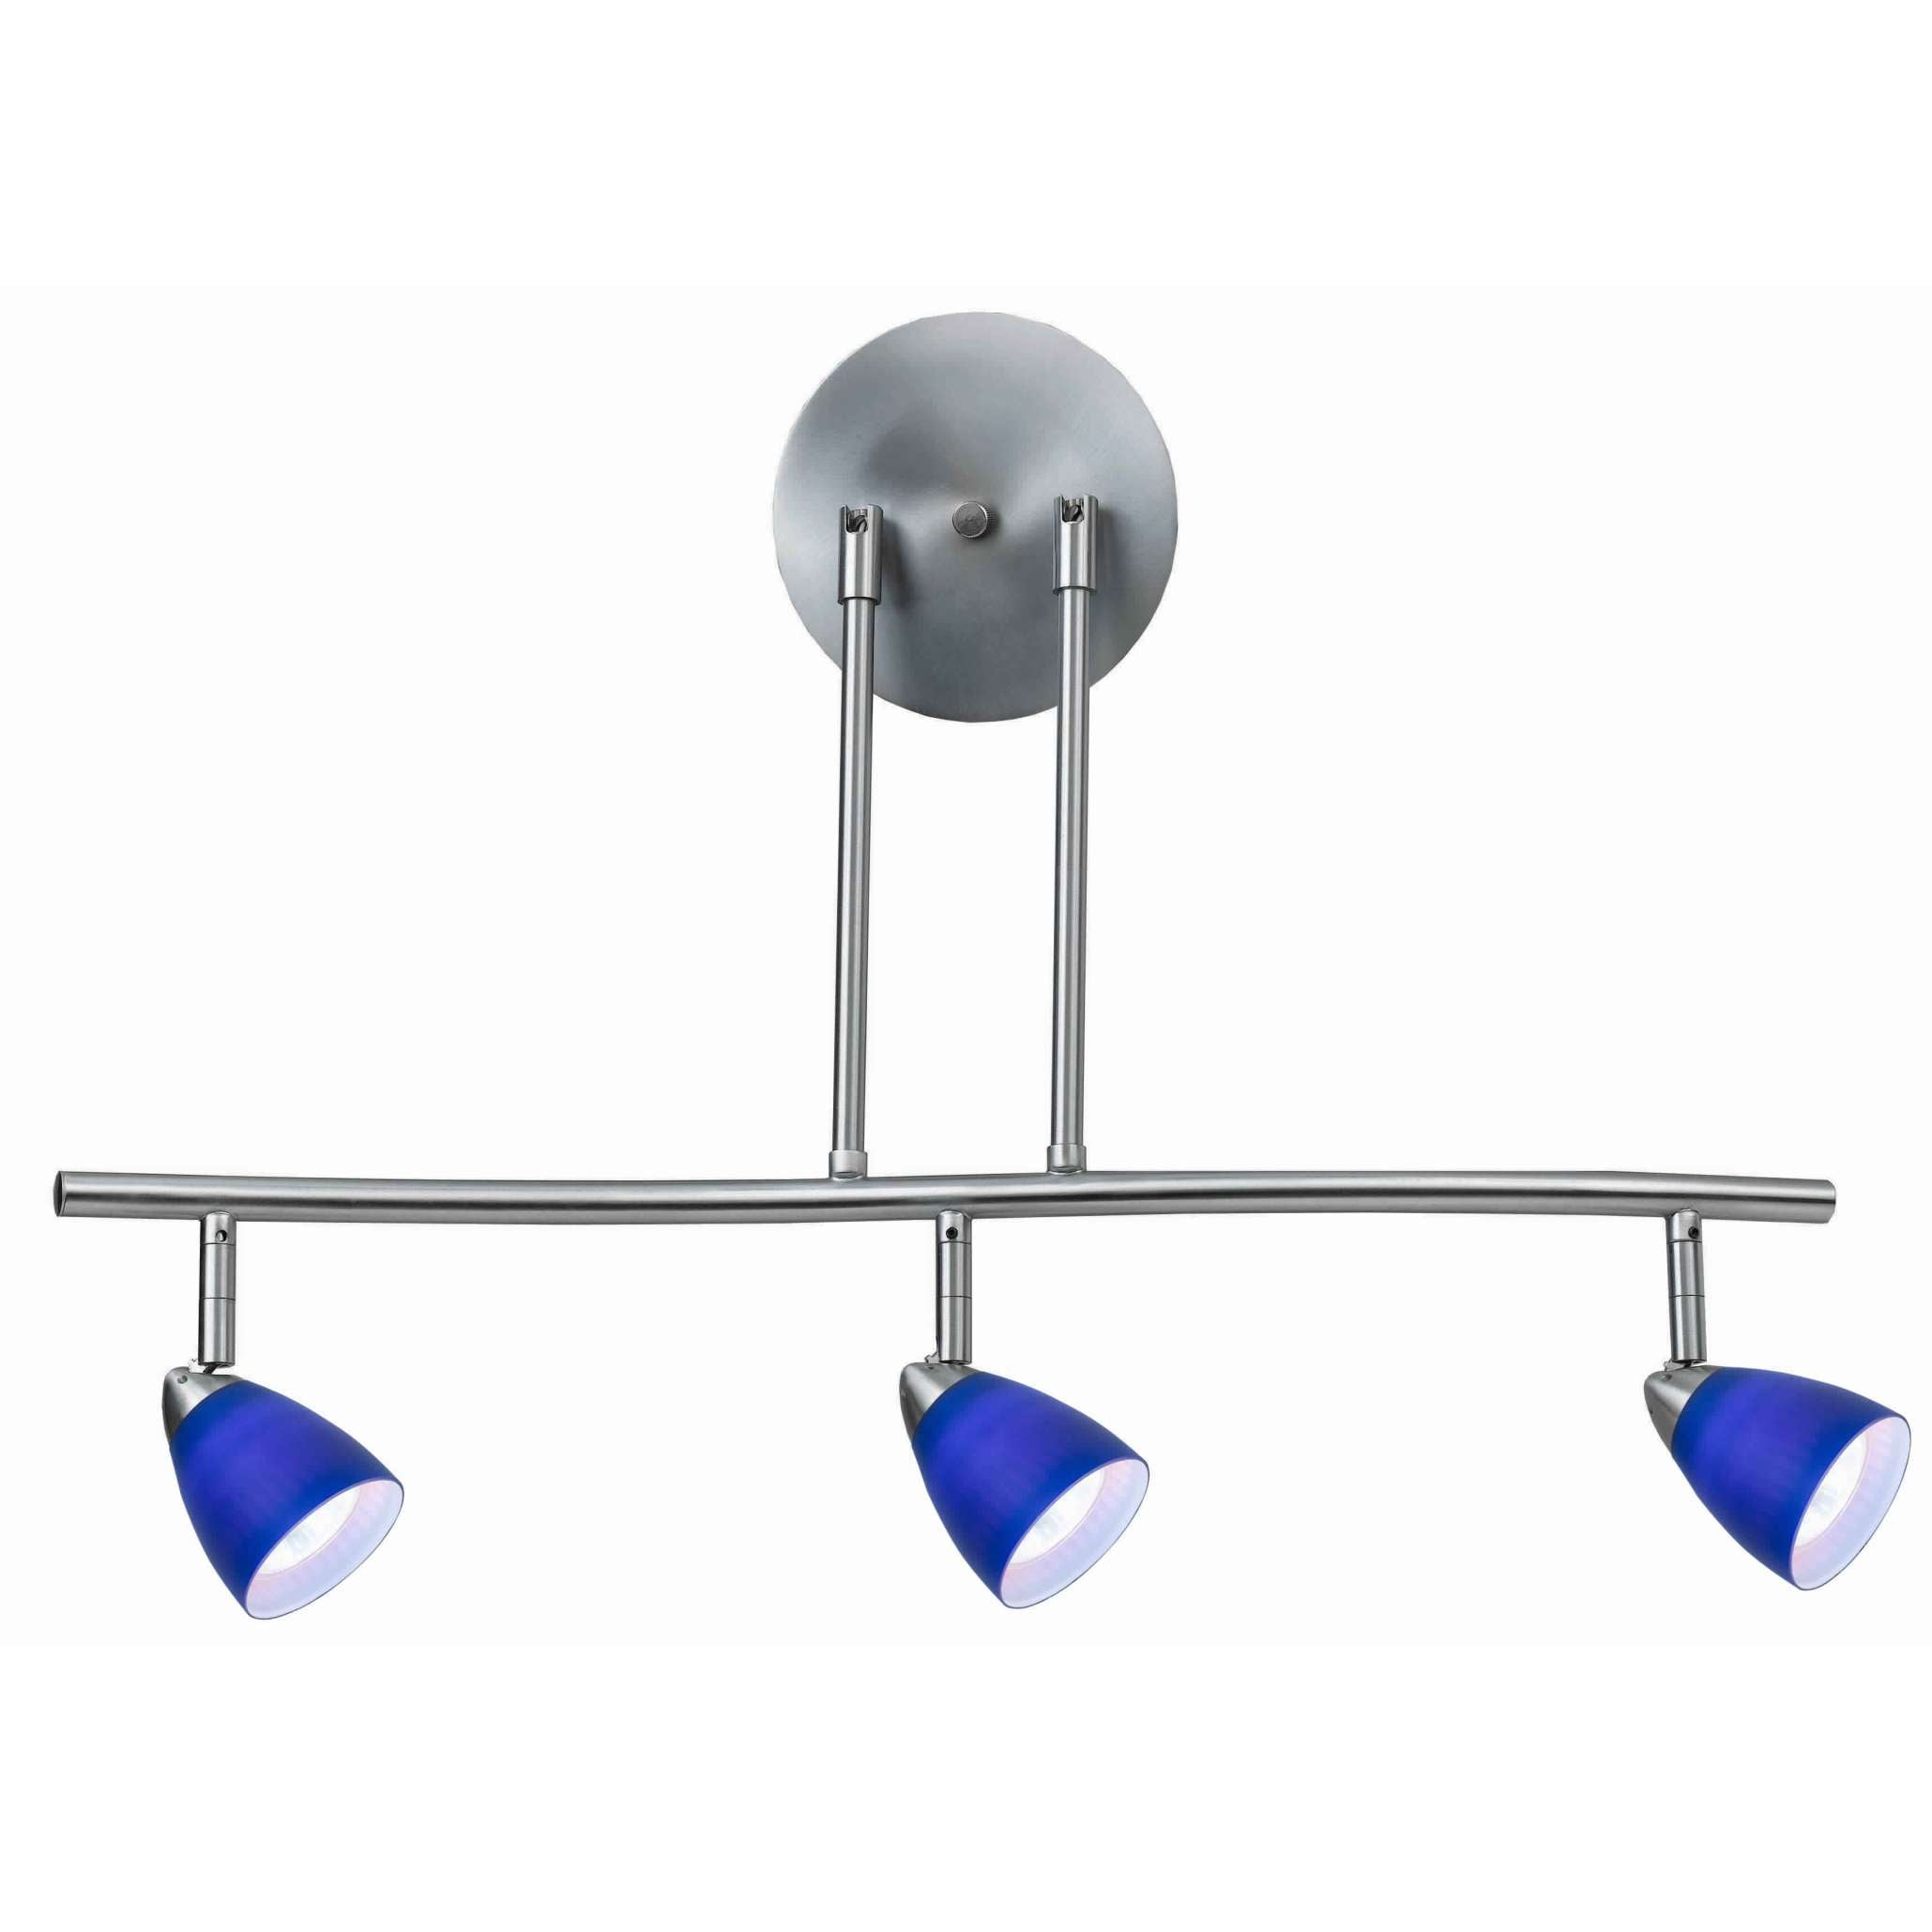 3 Light 120V Metal Track Light Fixture With Glass Shade, Silver And Blue By Benzara